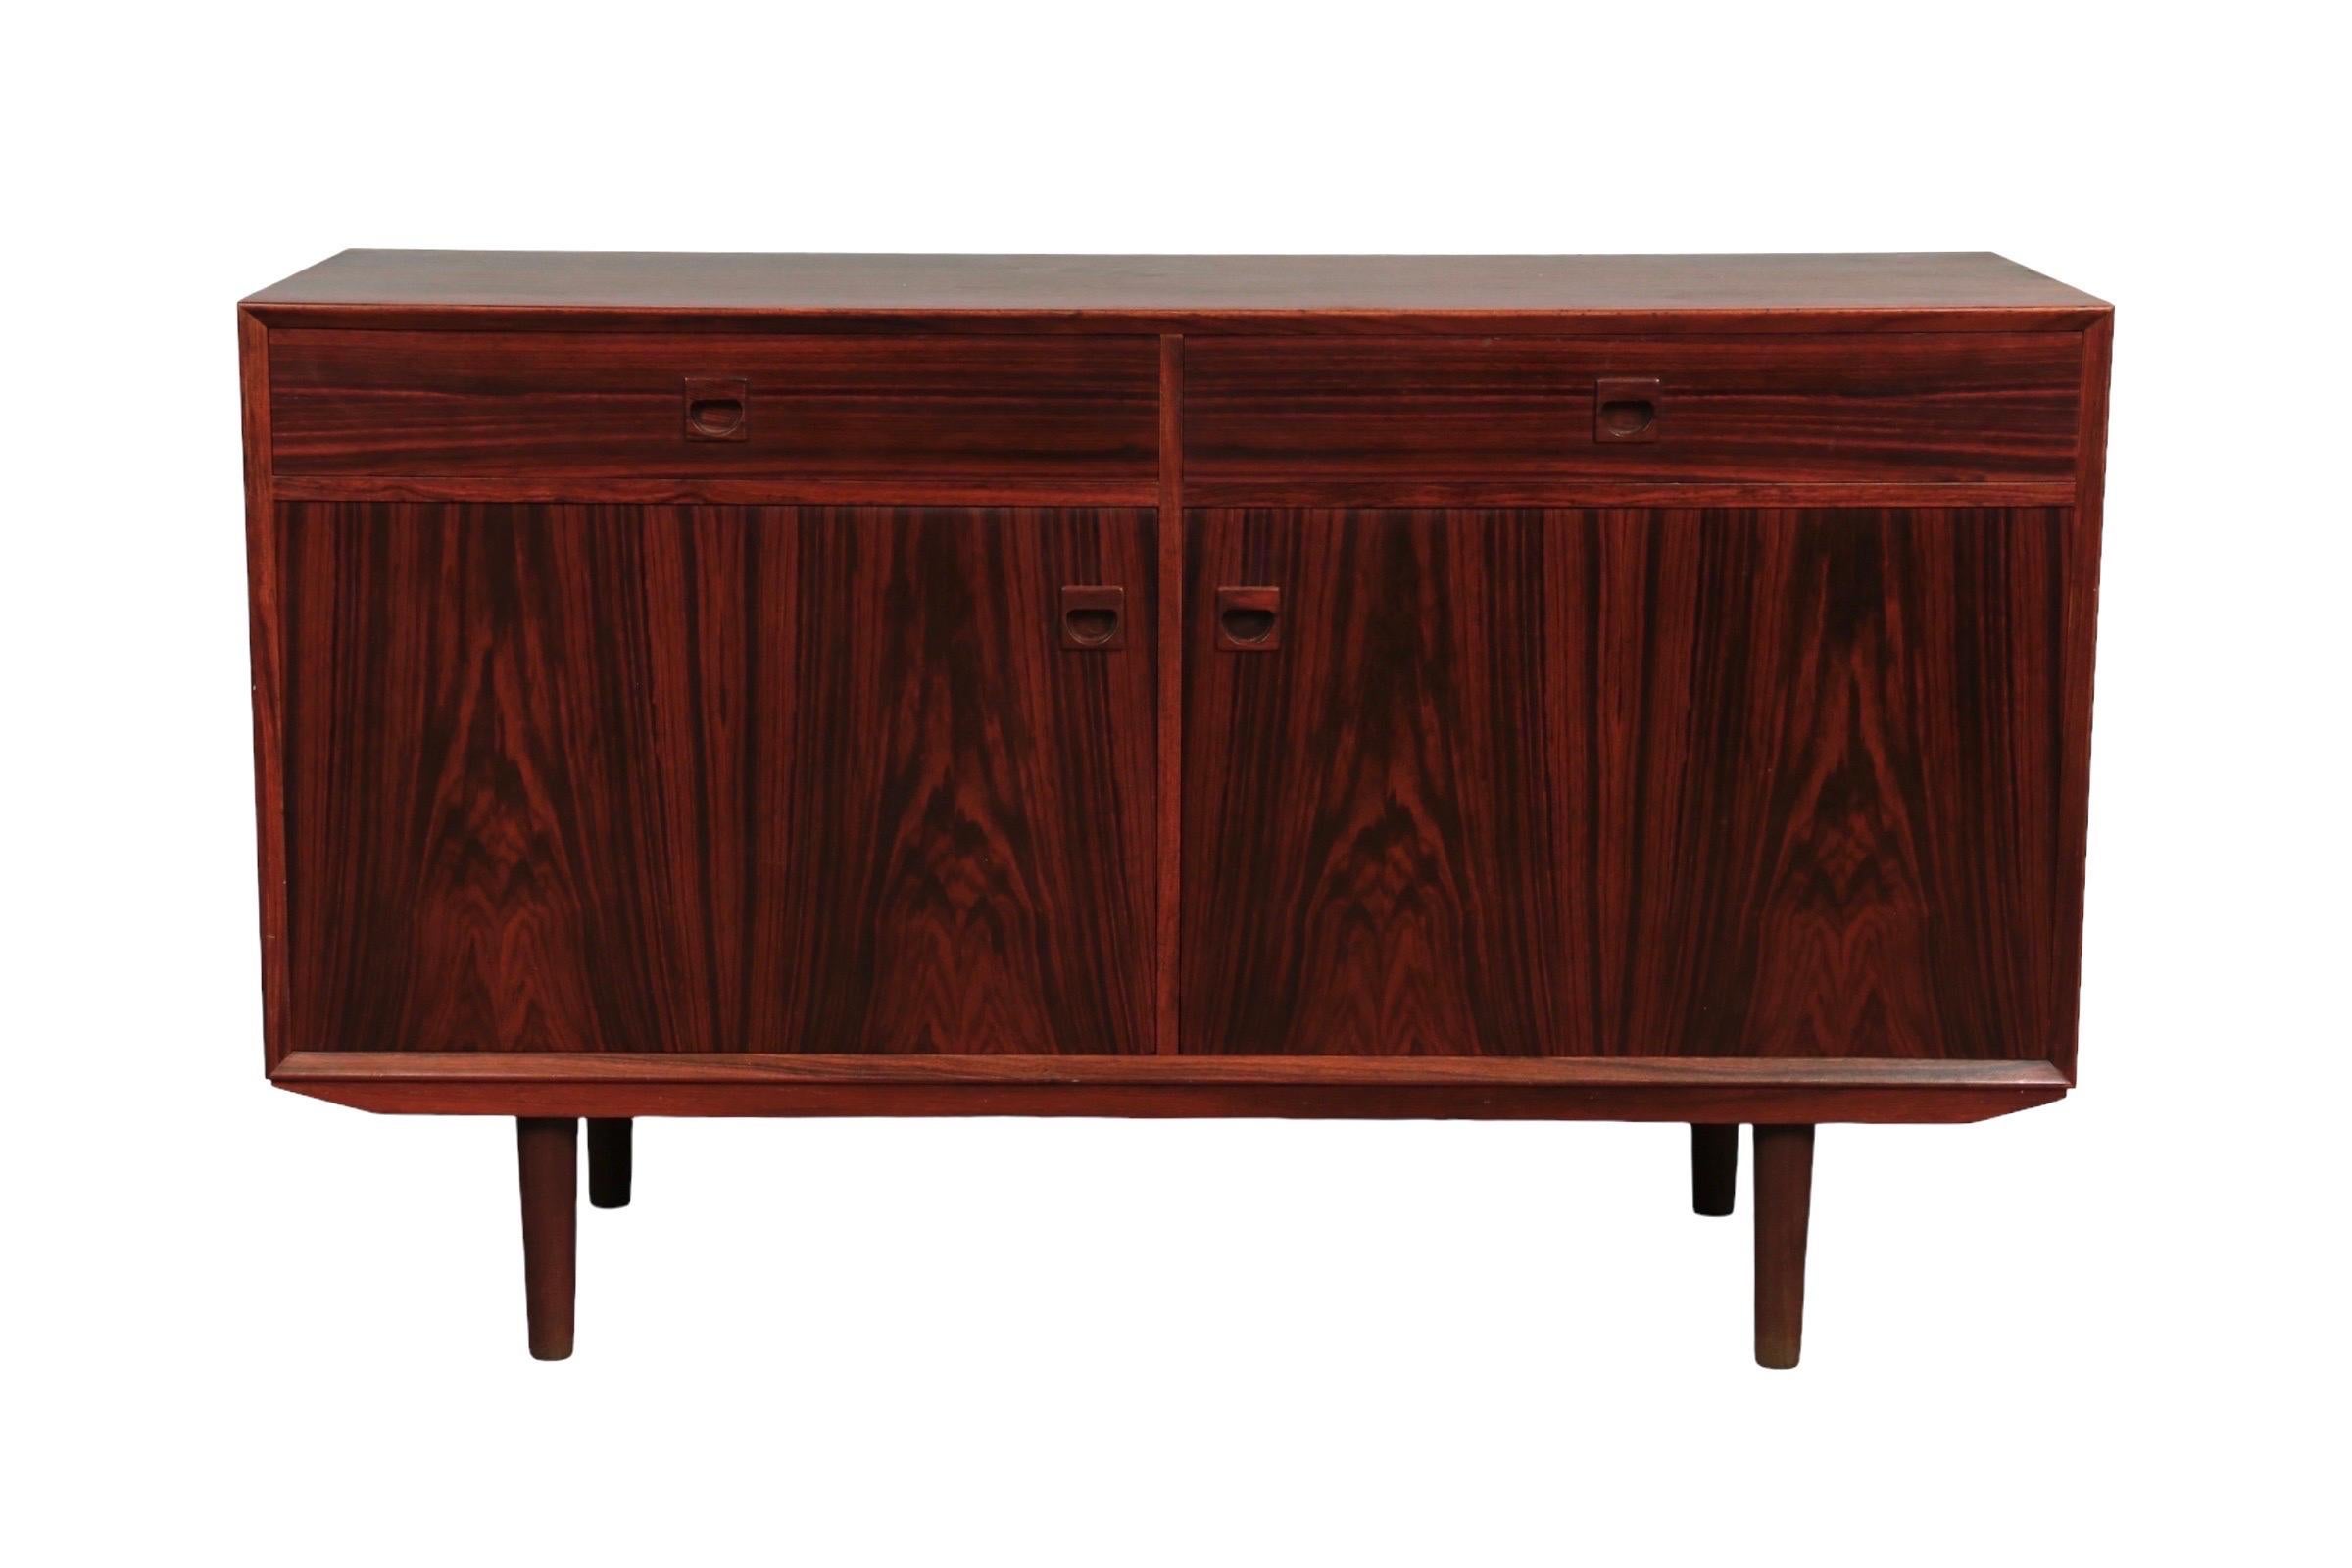 A mid-century credenza by Domino, made of rosewood. Two dovetailed drawers and cabinet doors open with refined recessed handles. Inside is housed a single shelf. Stands on round tapered legs.